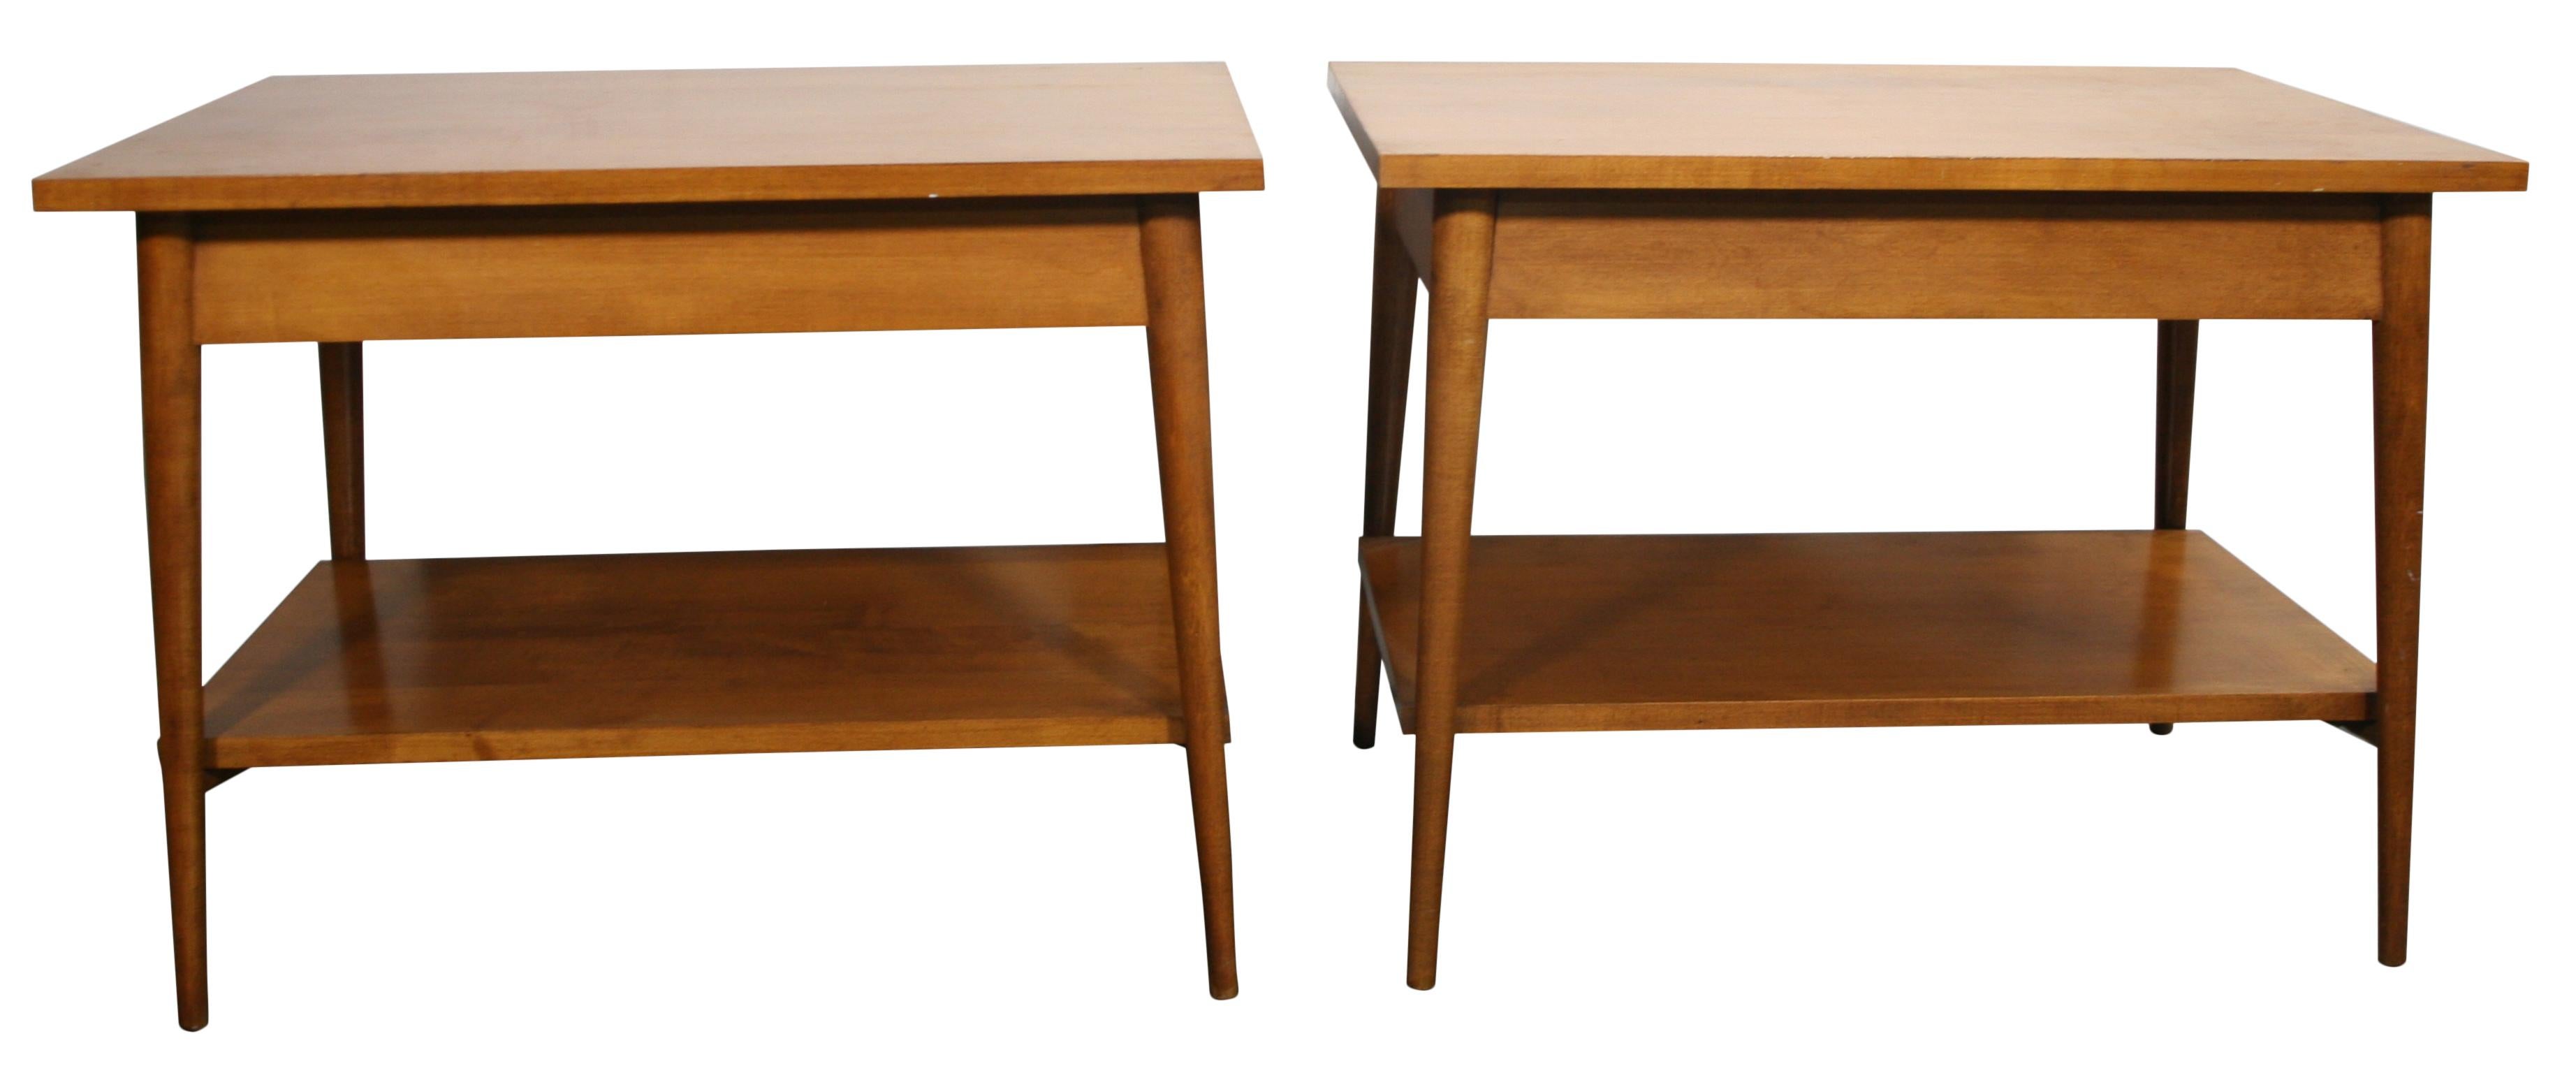 20th Century Midcentury Paul McCobb #1587 Nightstands Tobacco Finish Brass Knobs End Tables